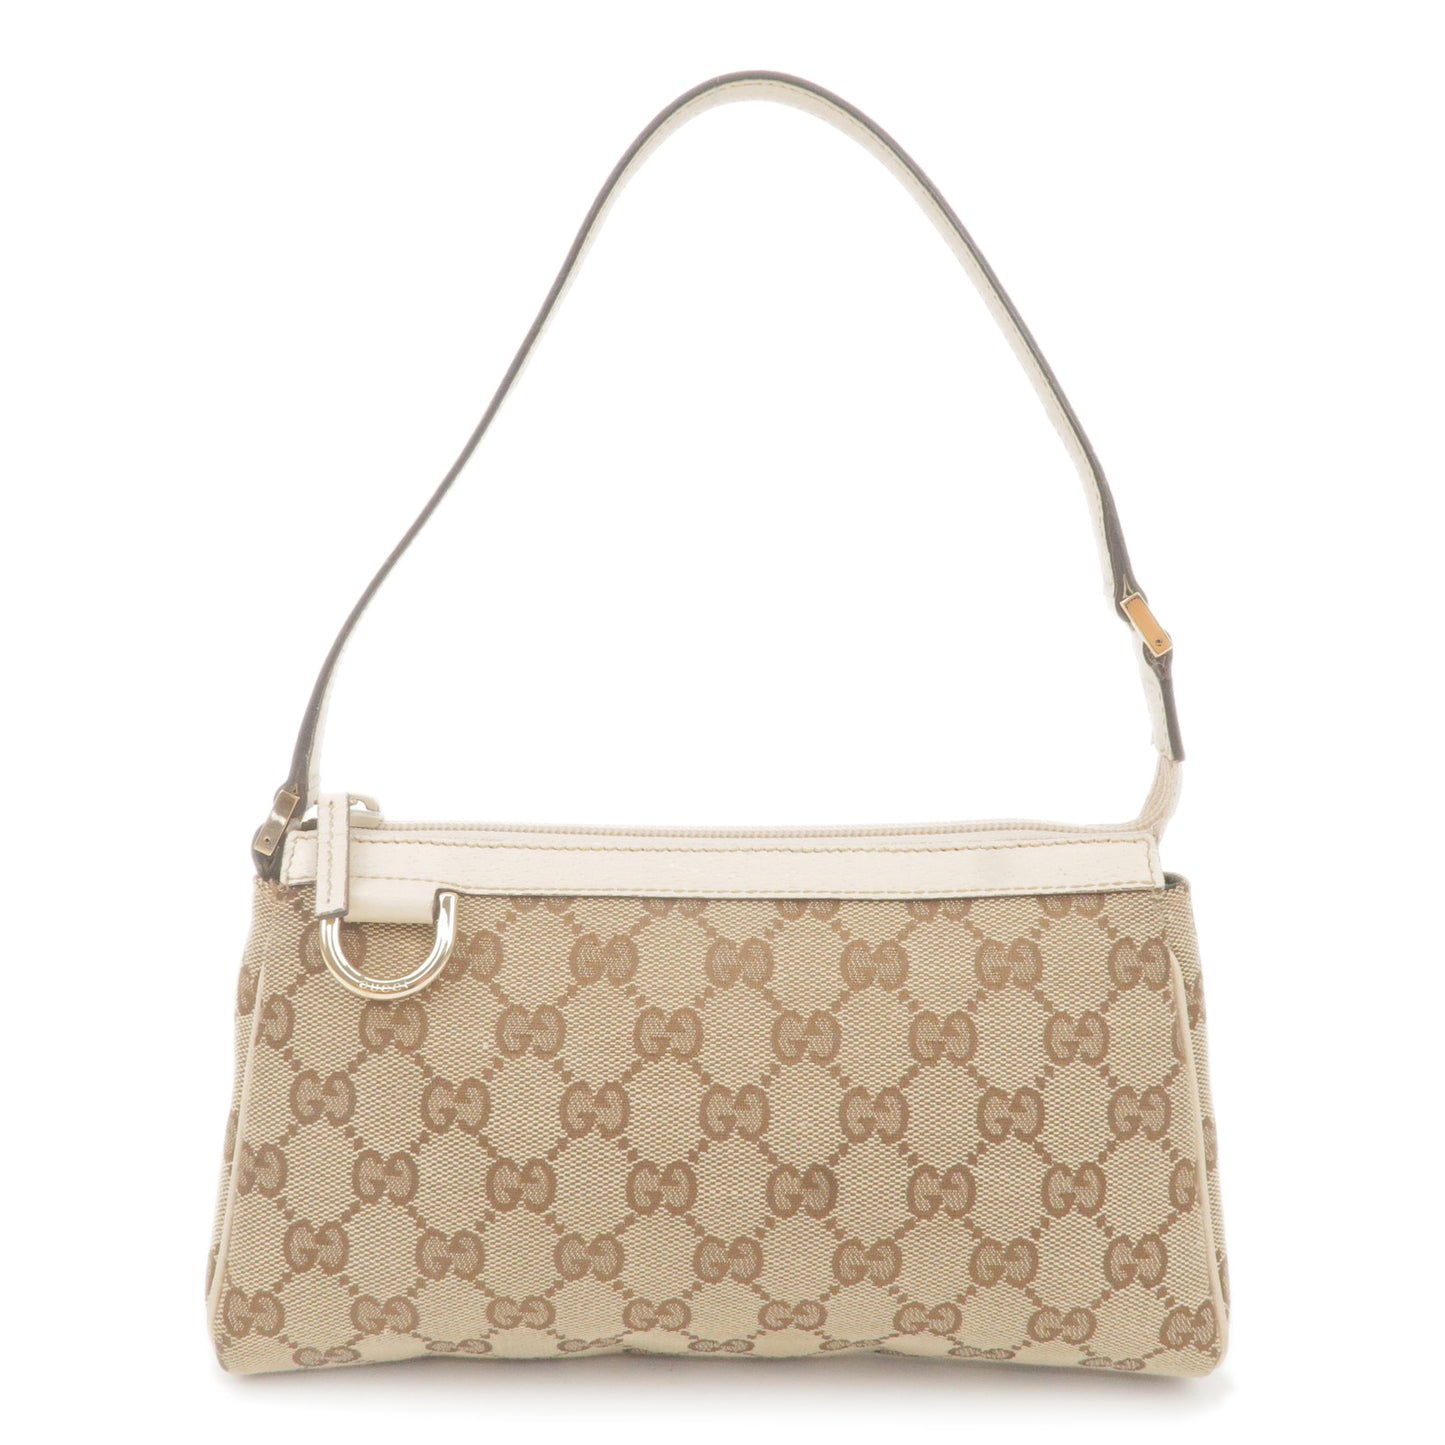 GUCCI-Abbey-GG-Canvas-Leather-Hand-Bag-Pouch-Beige-145750